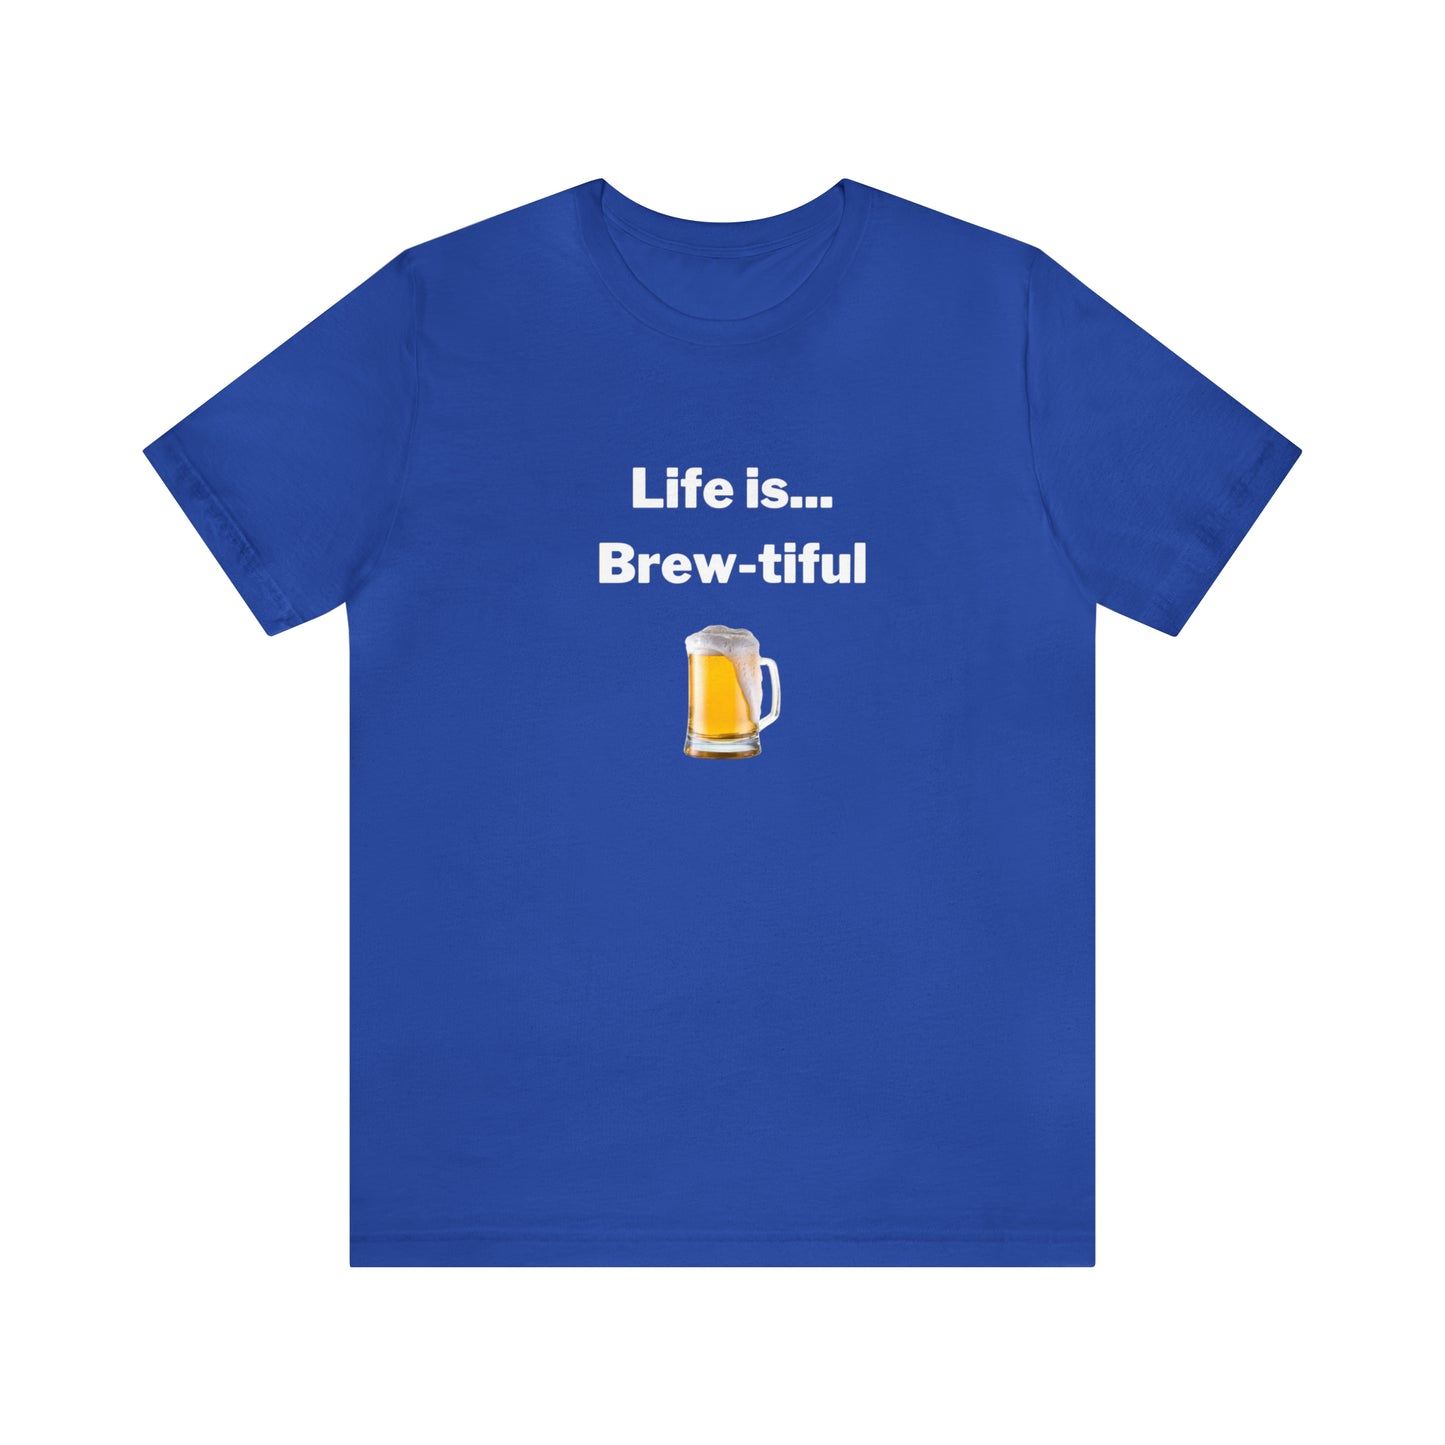 Life is Brew-tiful - Beer T-Shirt